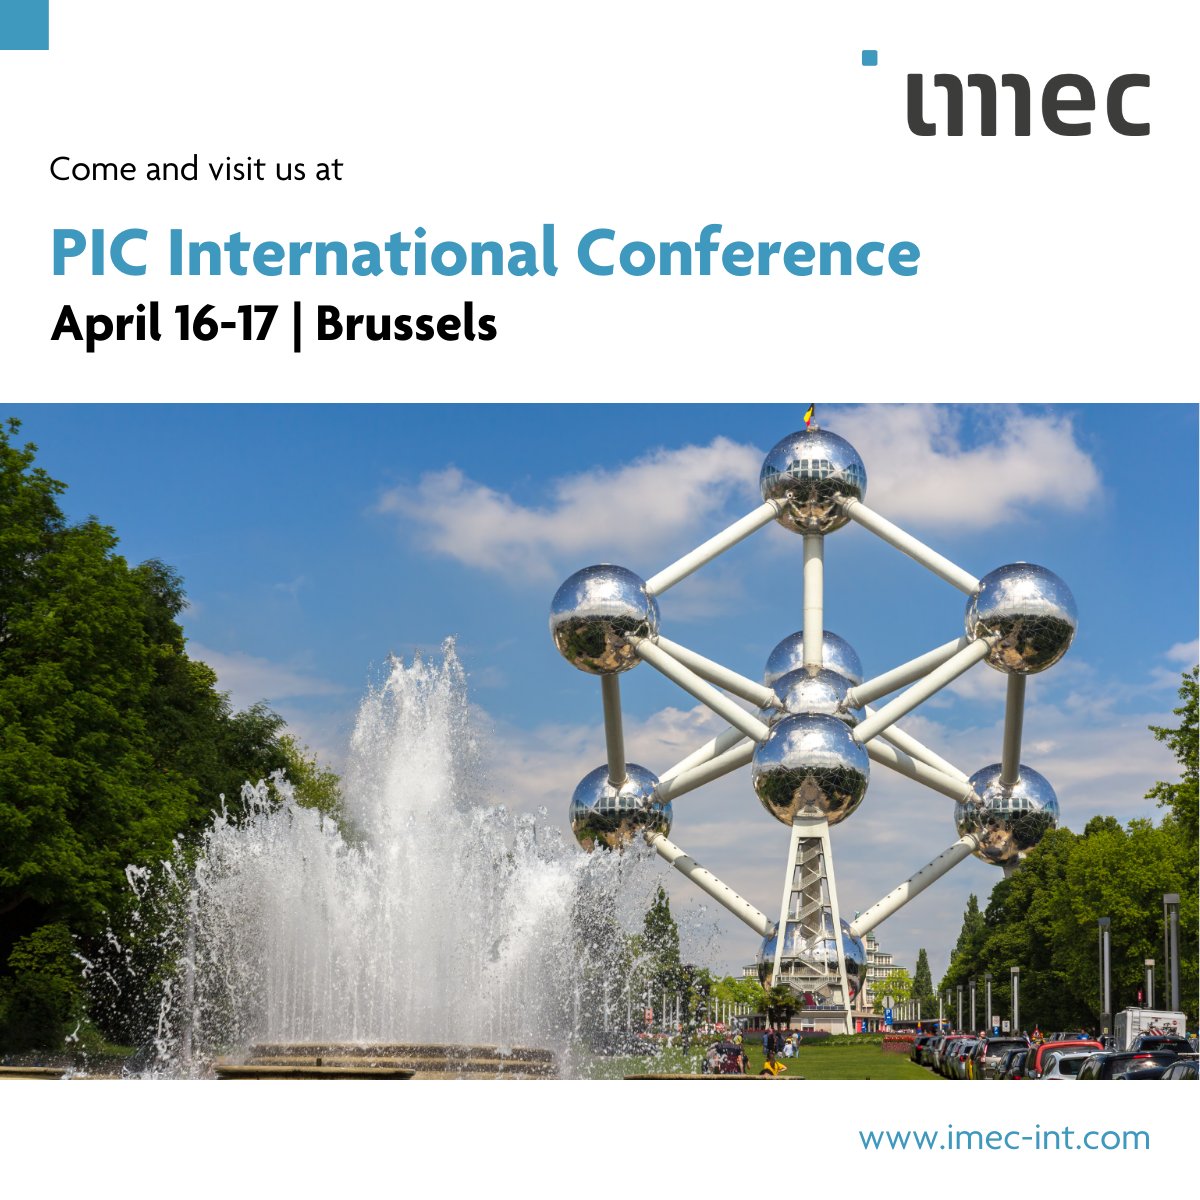 From optical IO for datacom and AI to solid-state LiDAR and quantum, discover the new developments of photonic integrated circuits (PICs) and their growing applications at @PICInternational on April 16 – 17 in Brussels. Learn more: ow.ly/IT0P50Rc09s